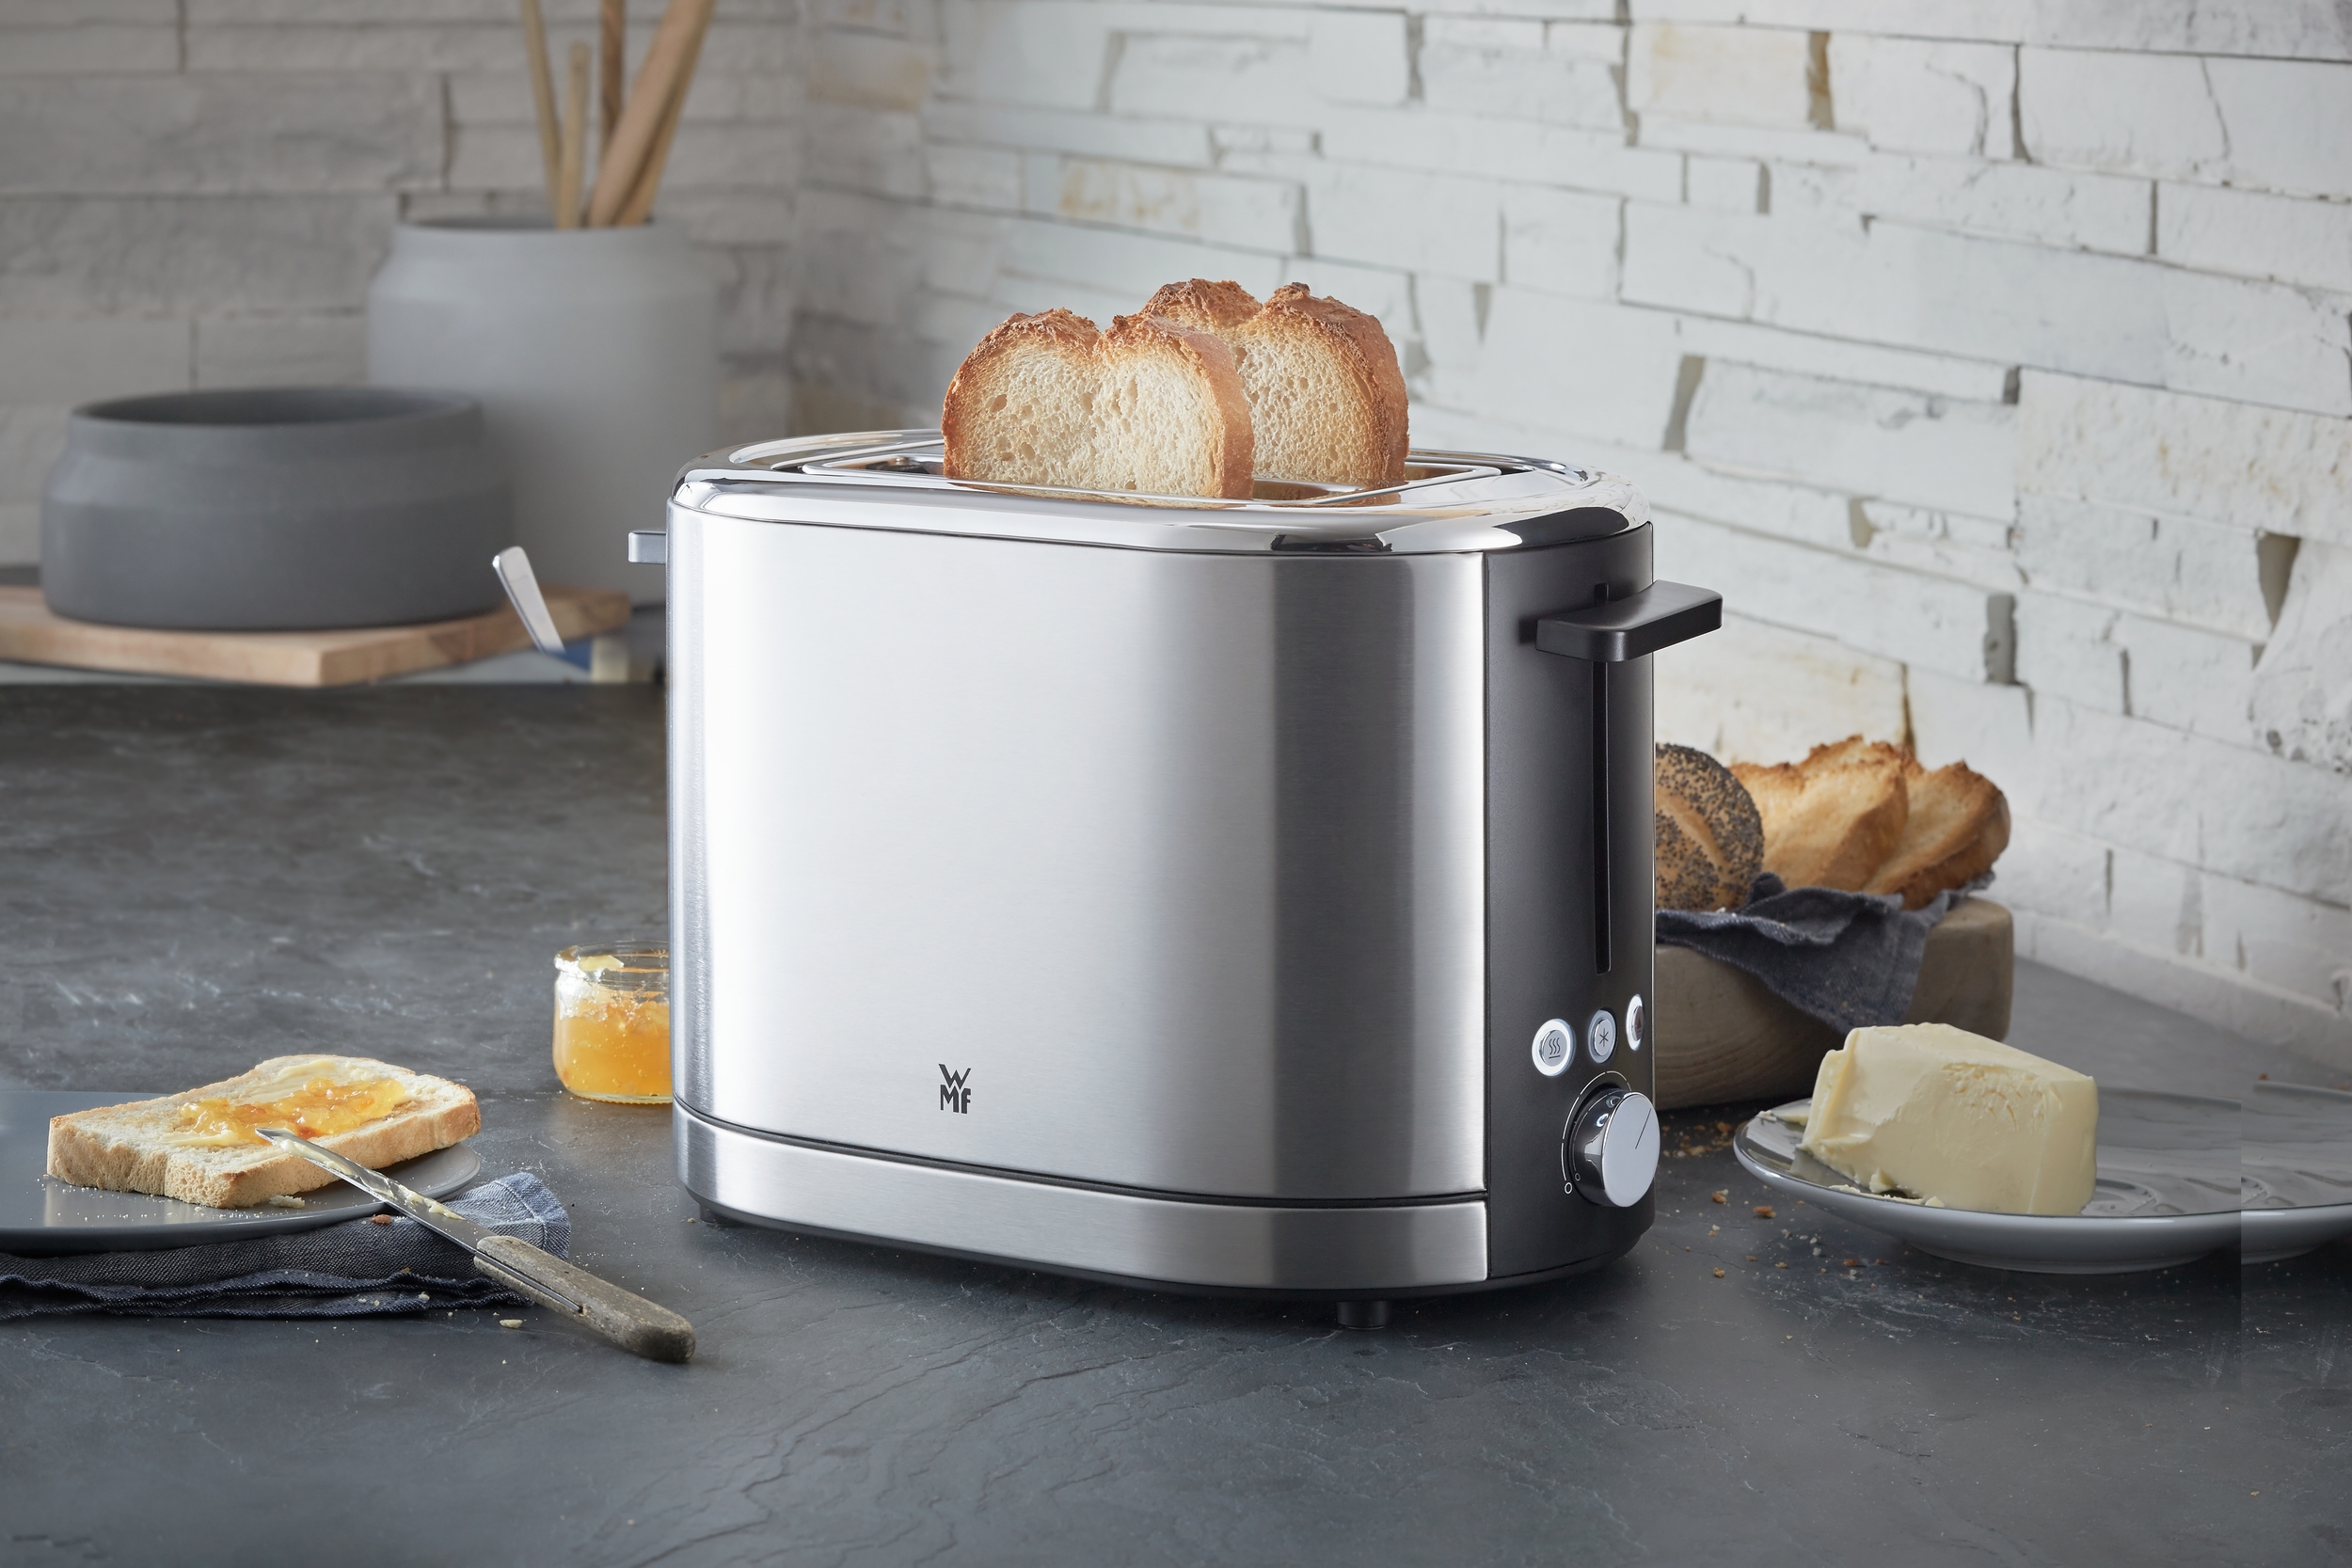 Buy WMF Lono Toaster with home baking attachment Cromargan